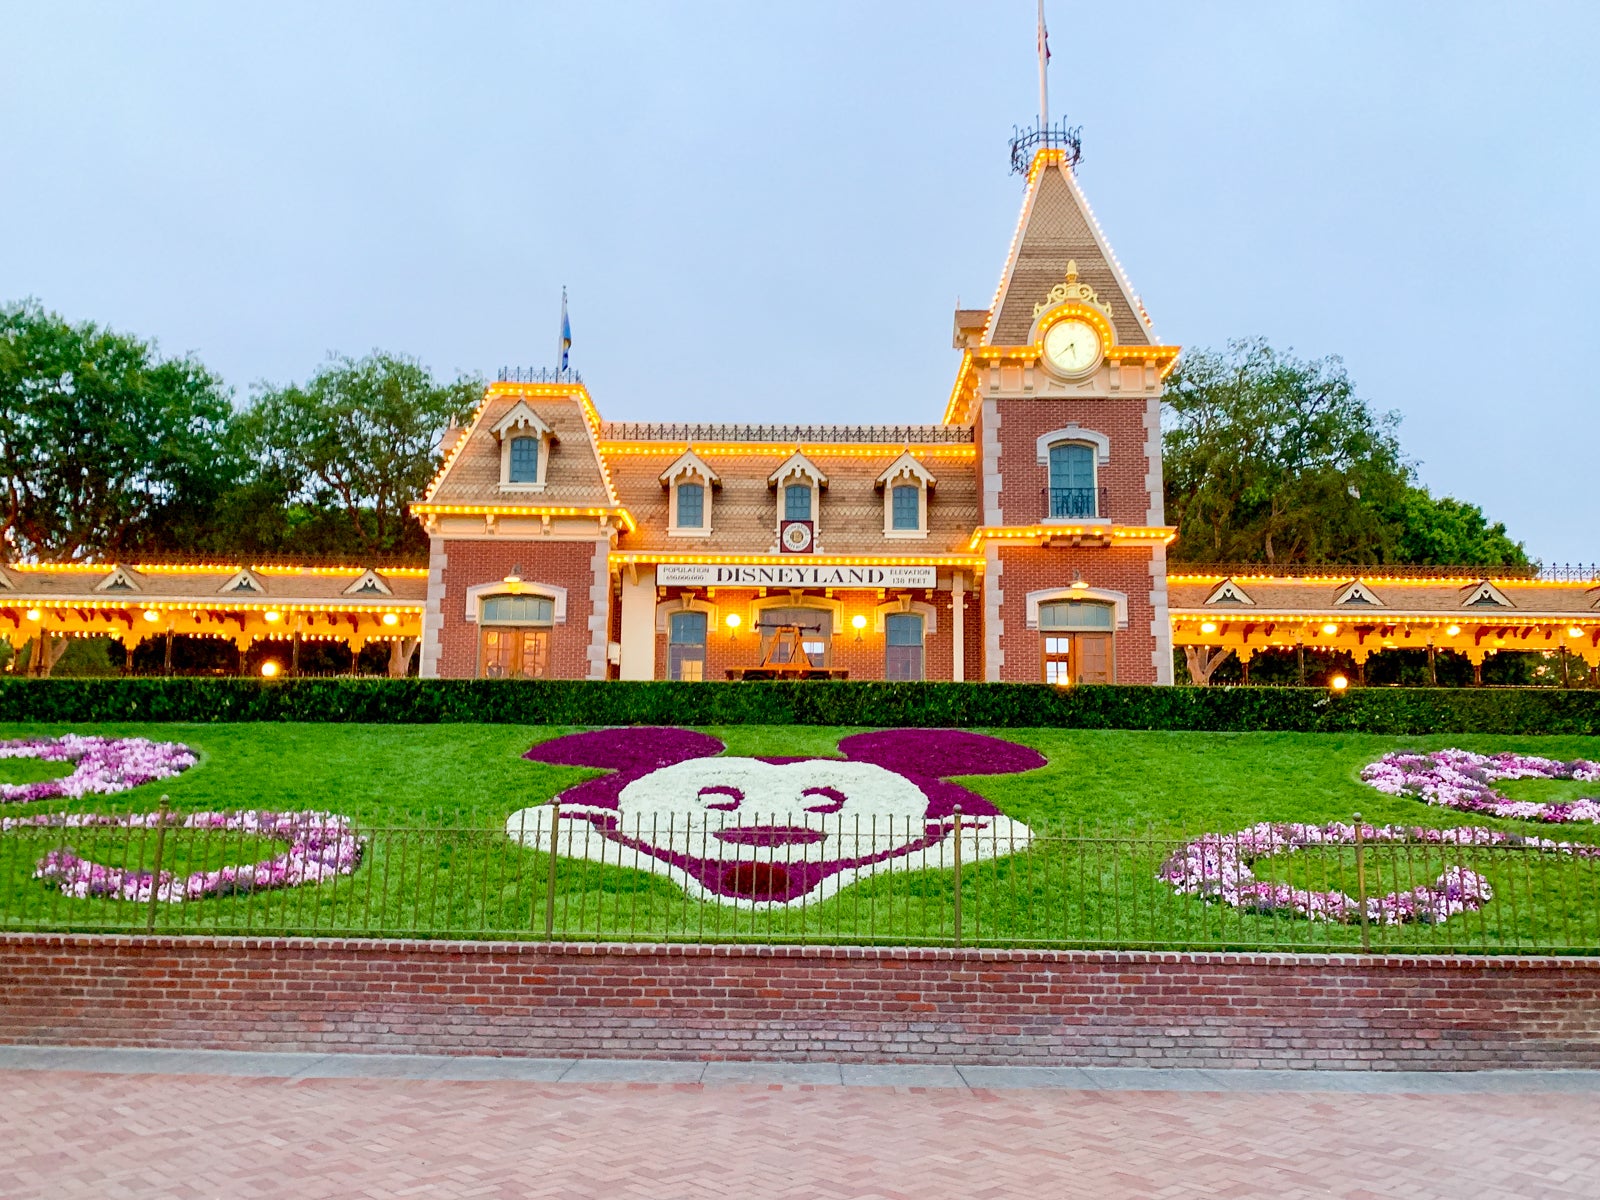 Prices at Disney are up — again, effective immediately